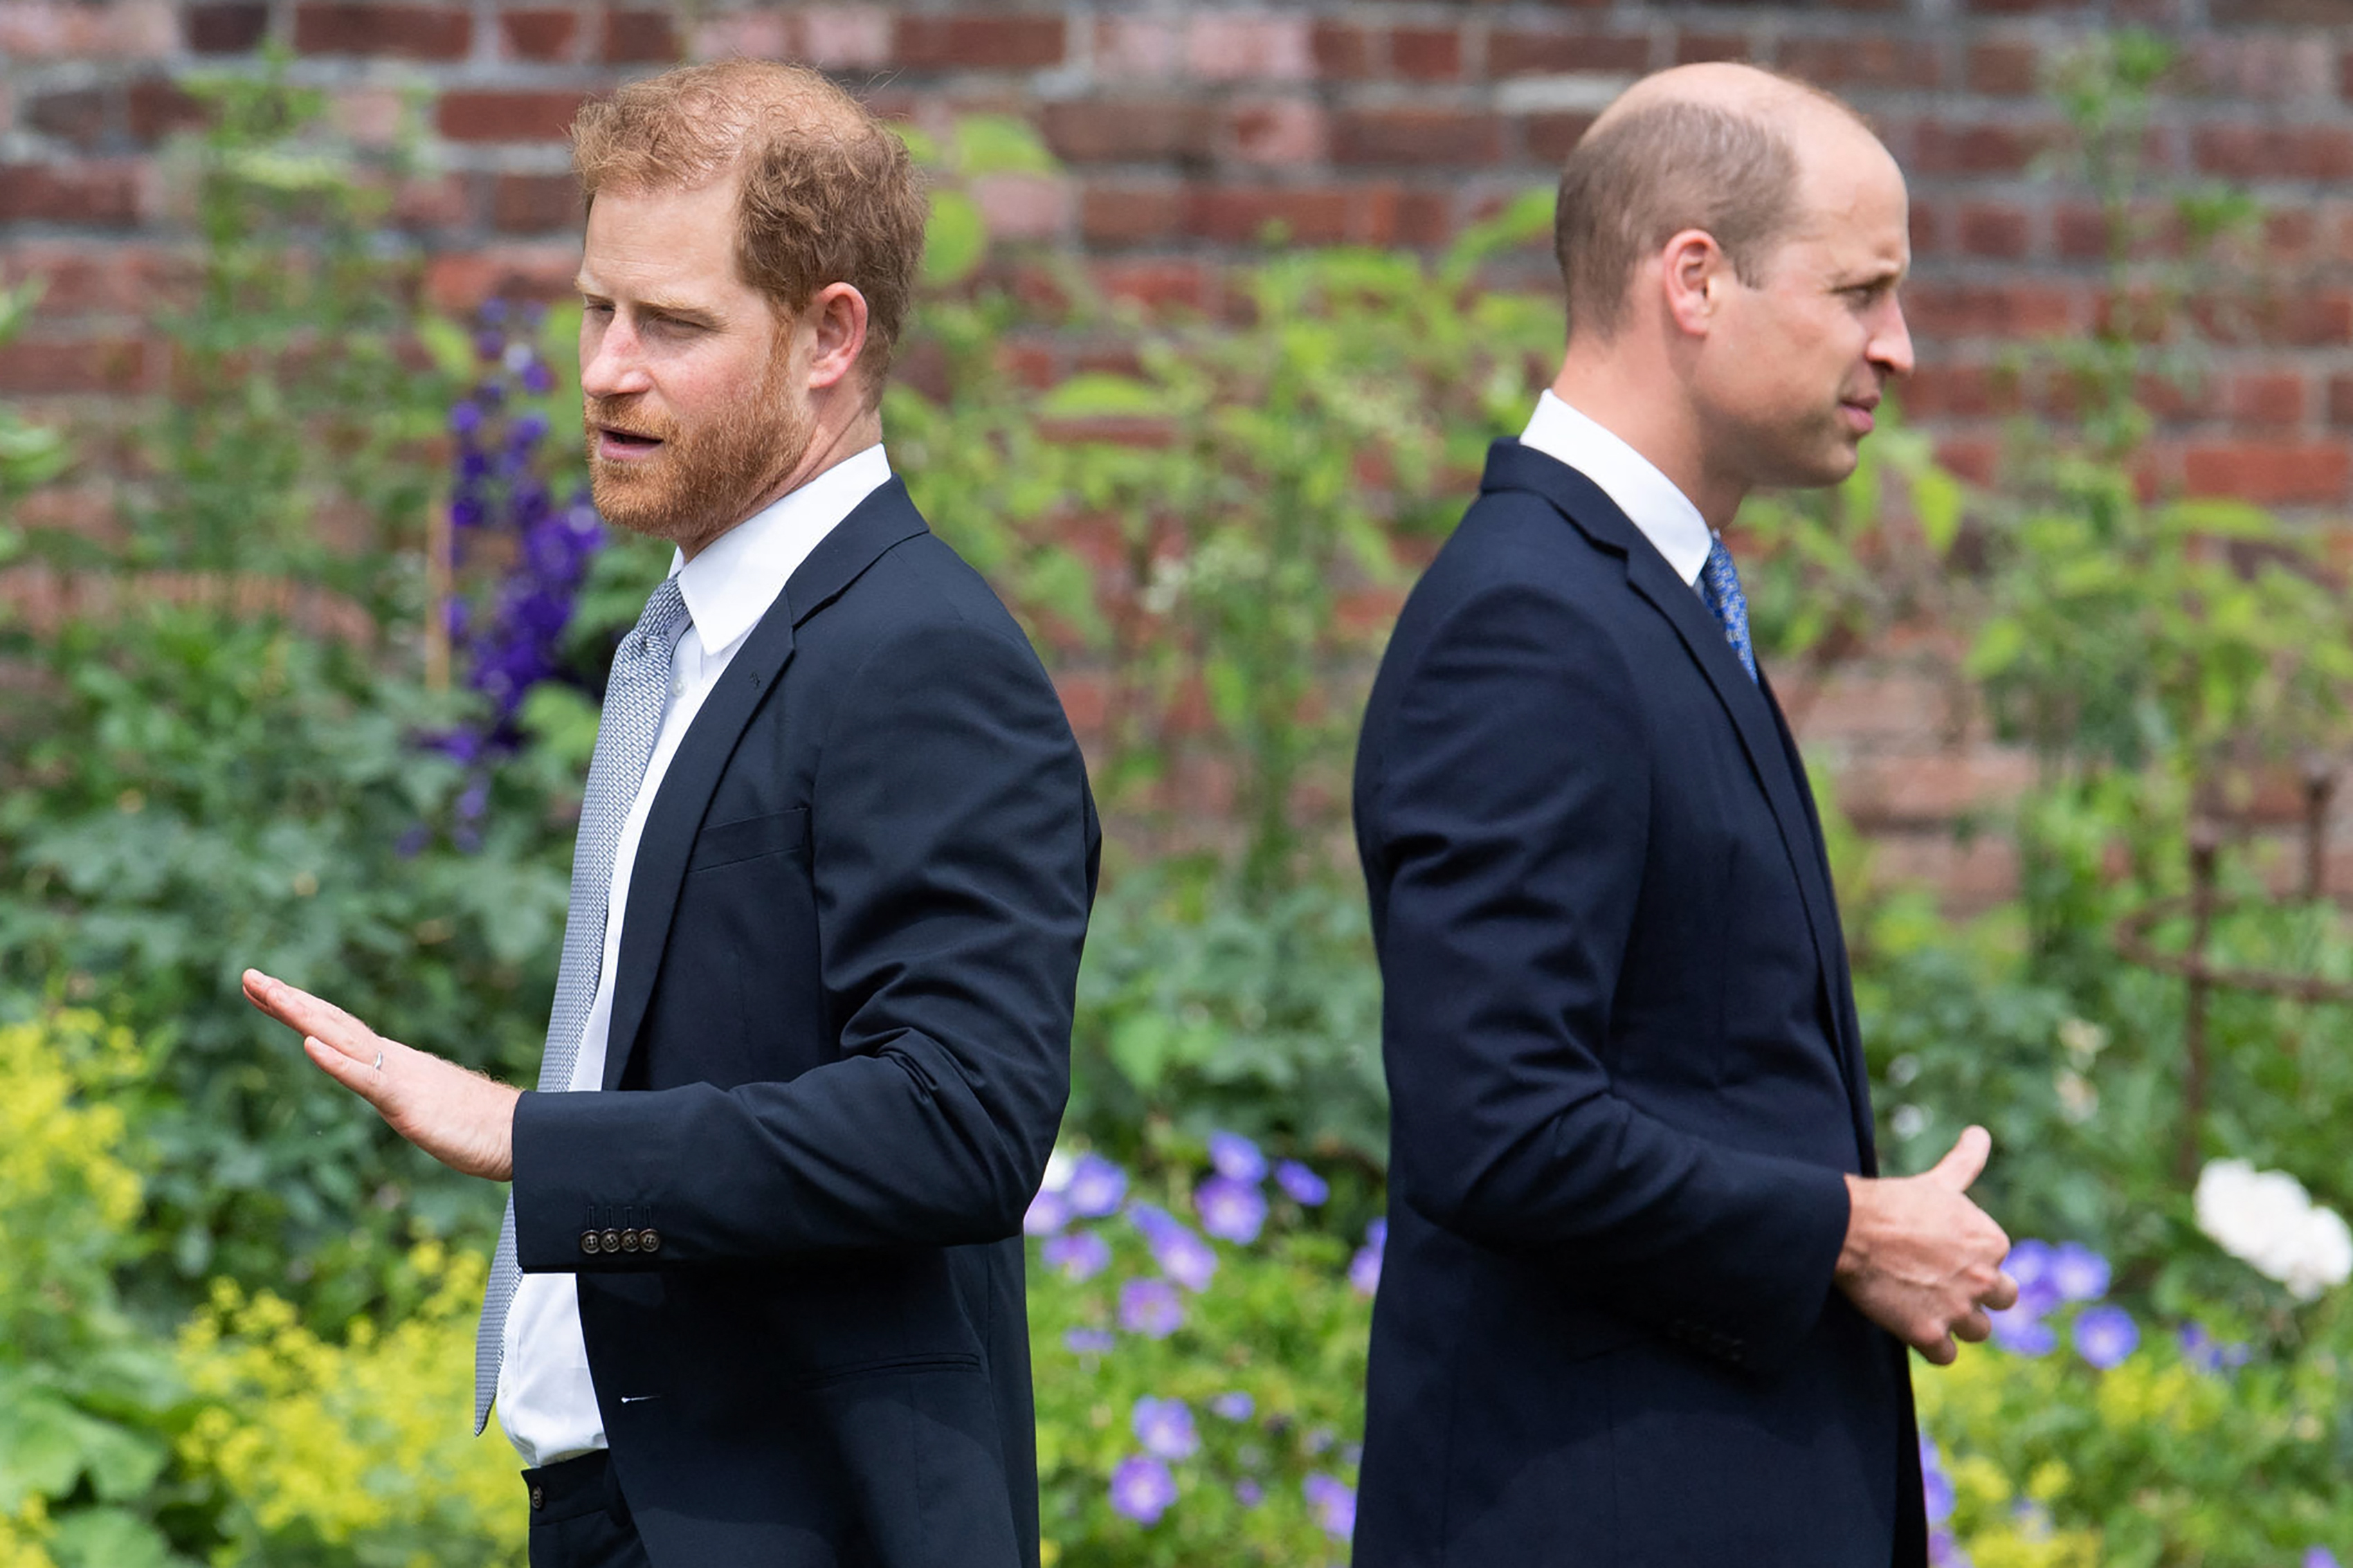 Prince Harry, Duke of Sussex and Prince William, Duke of Cambridge attend the unveiling of a statue of their mother, Princess Diana in Kensington Palace, London on July 1, 2021 | Source: Getty Images